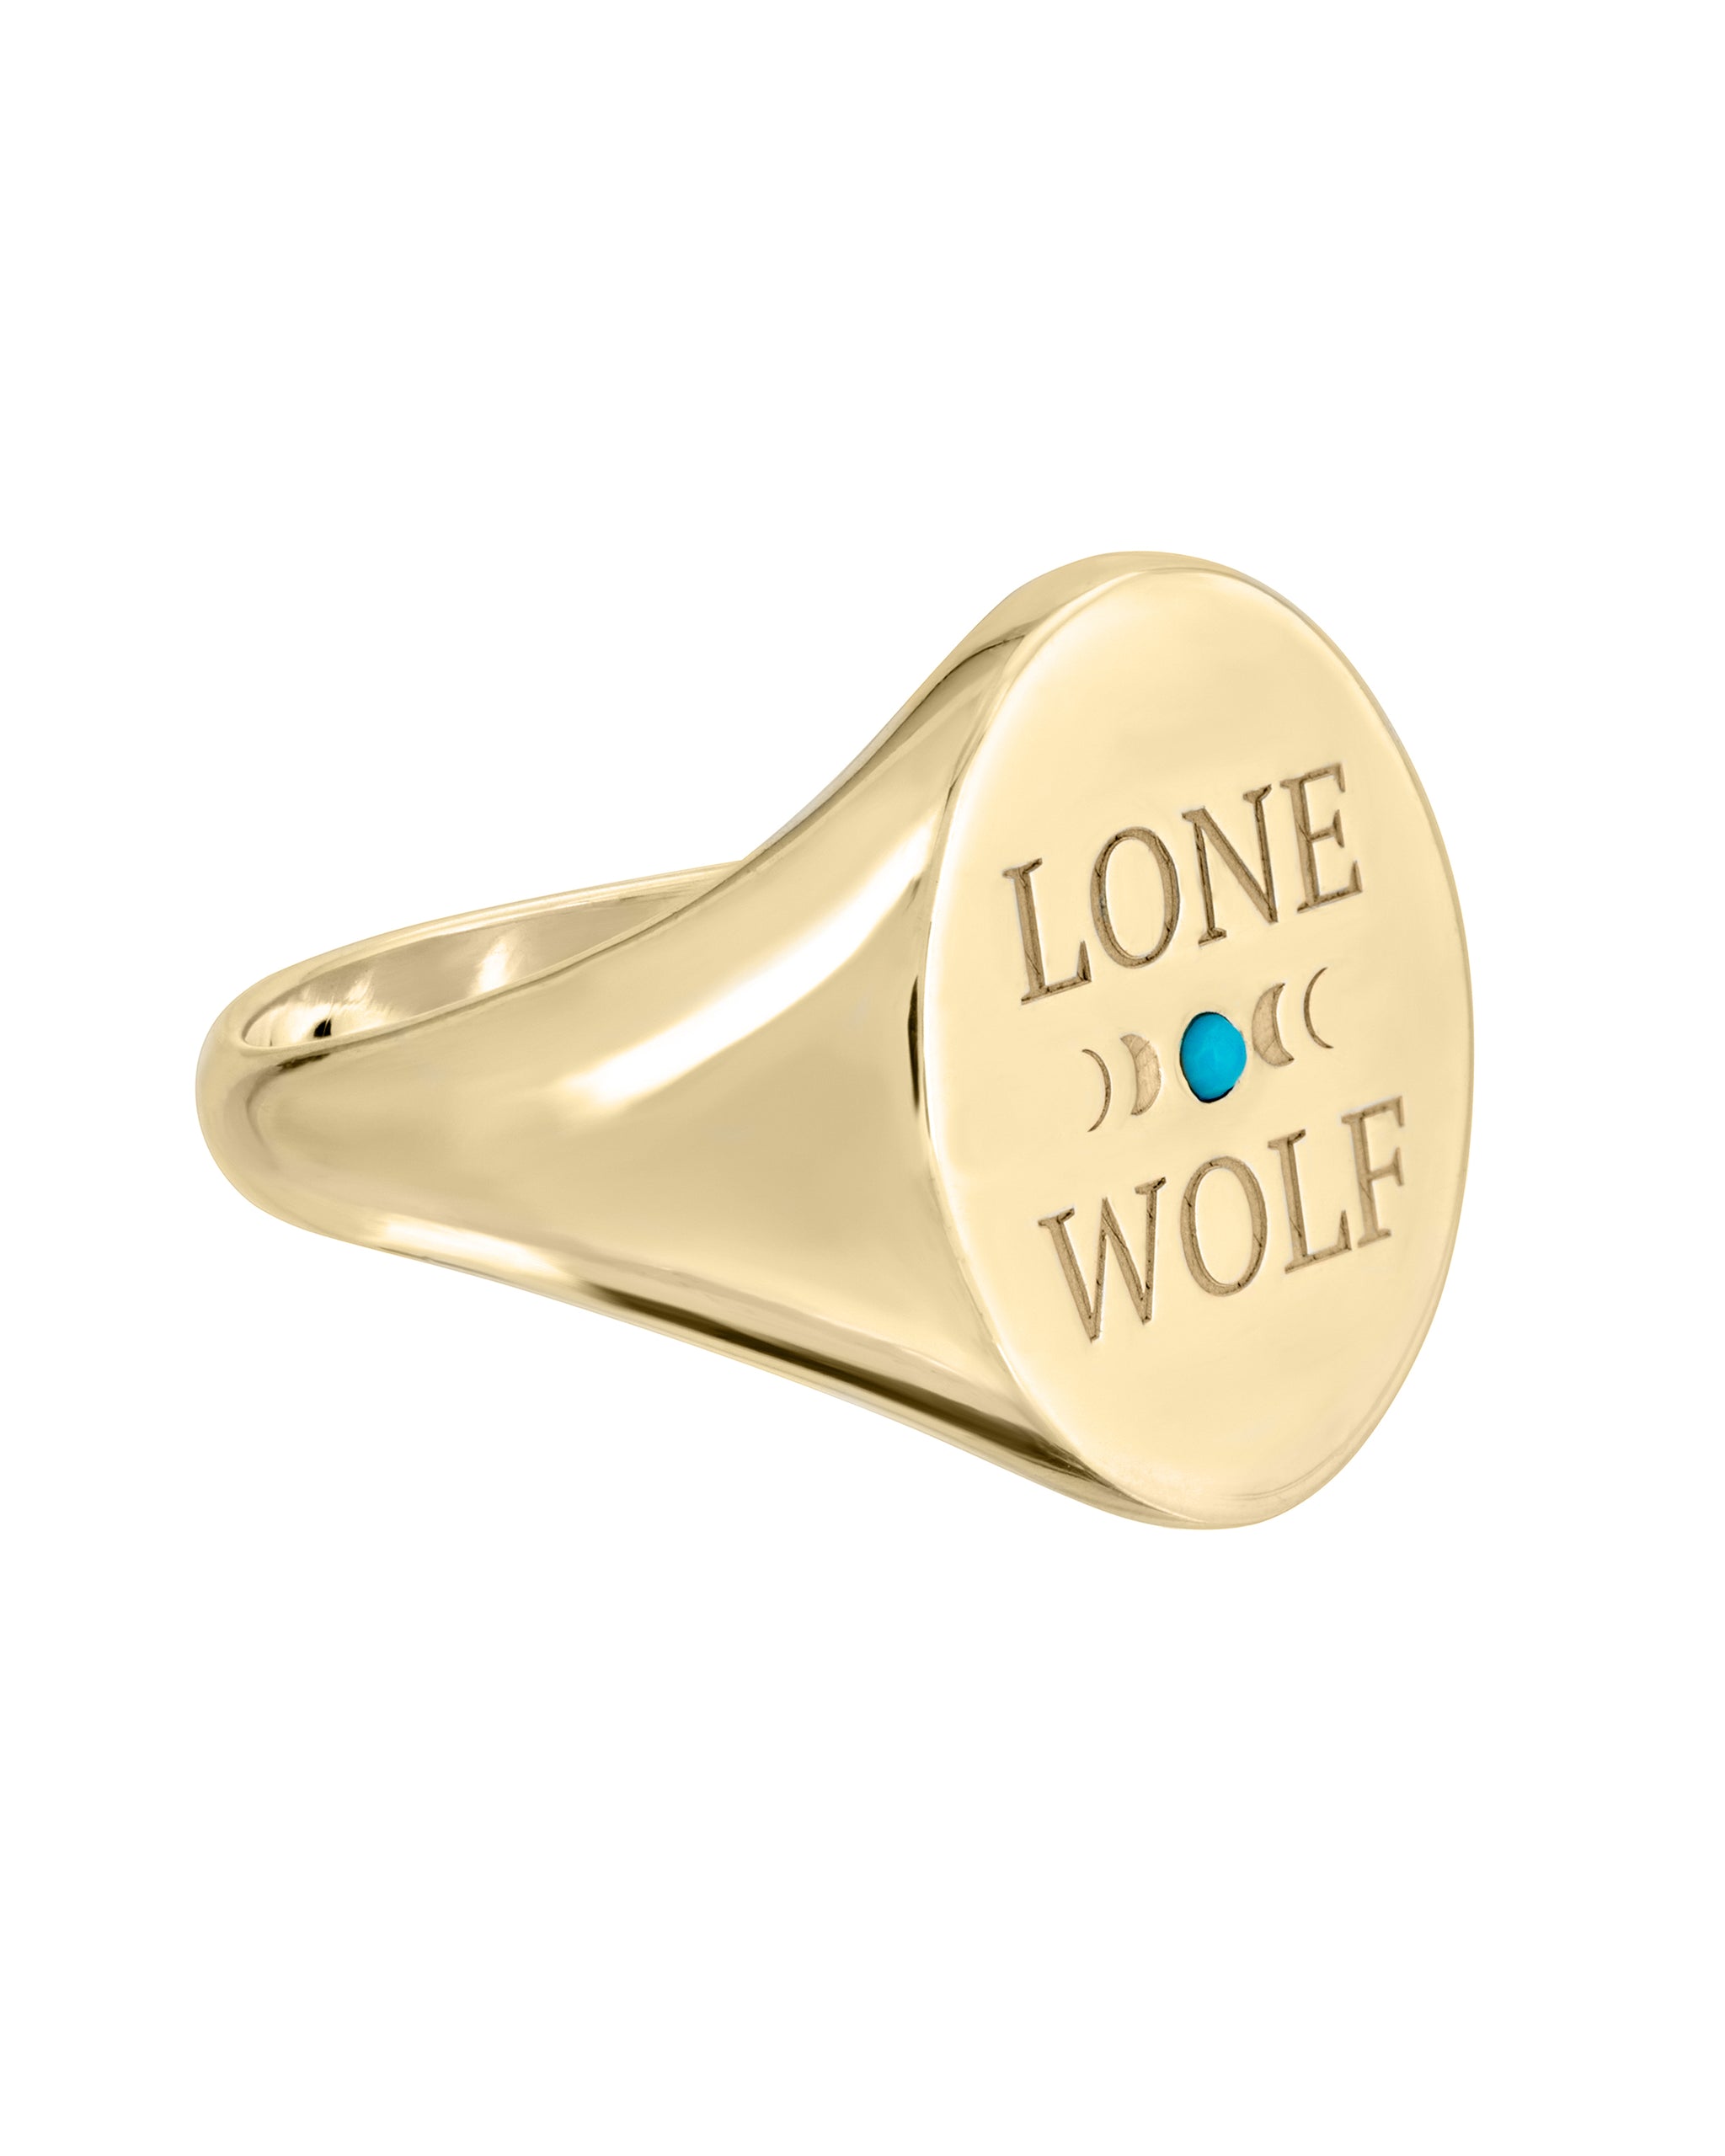 LONE WOLF TURQUOISE RING 14K